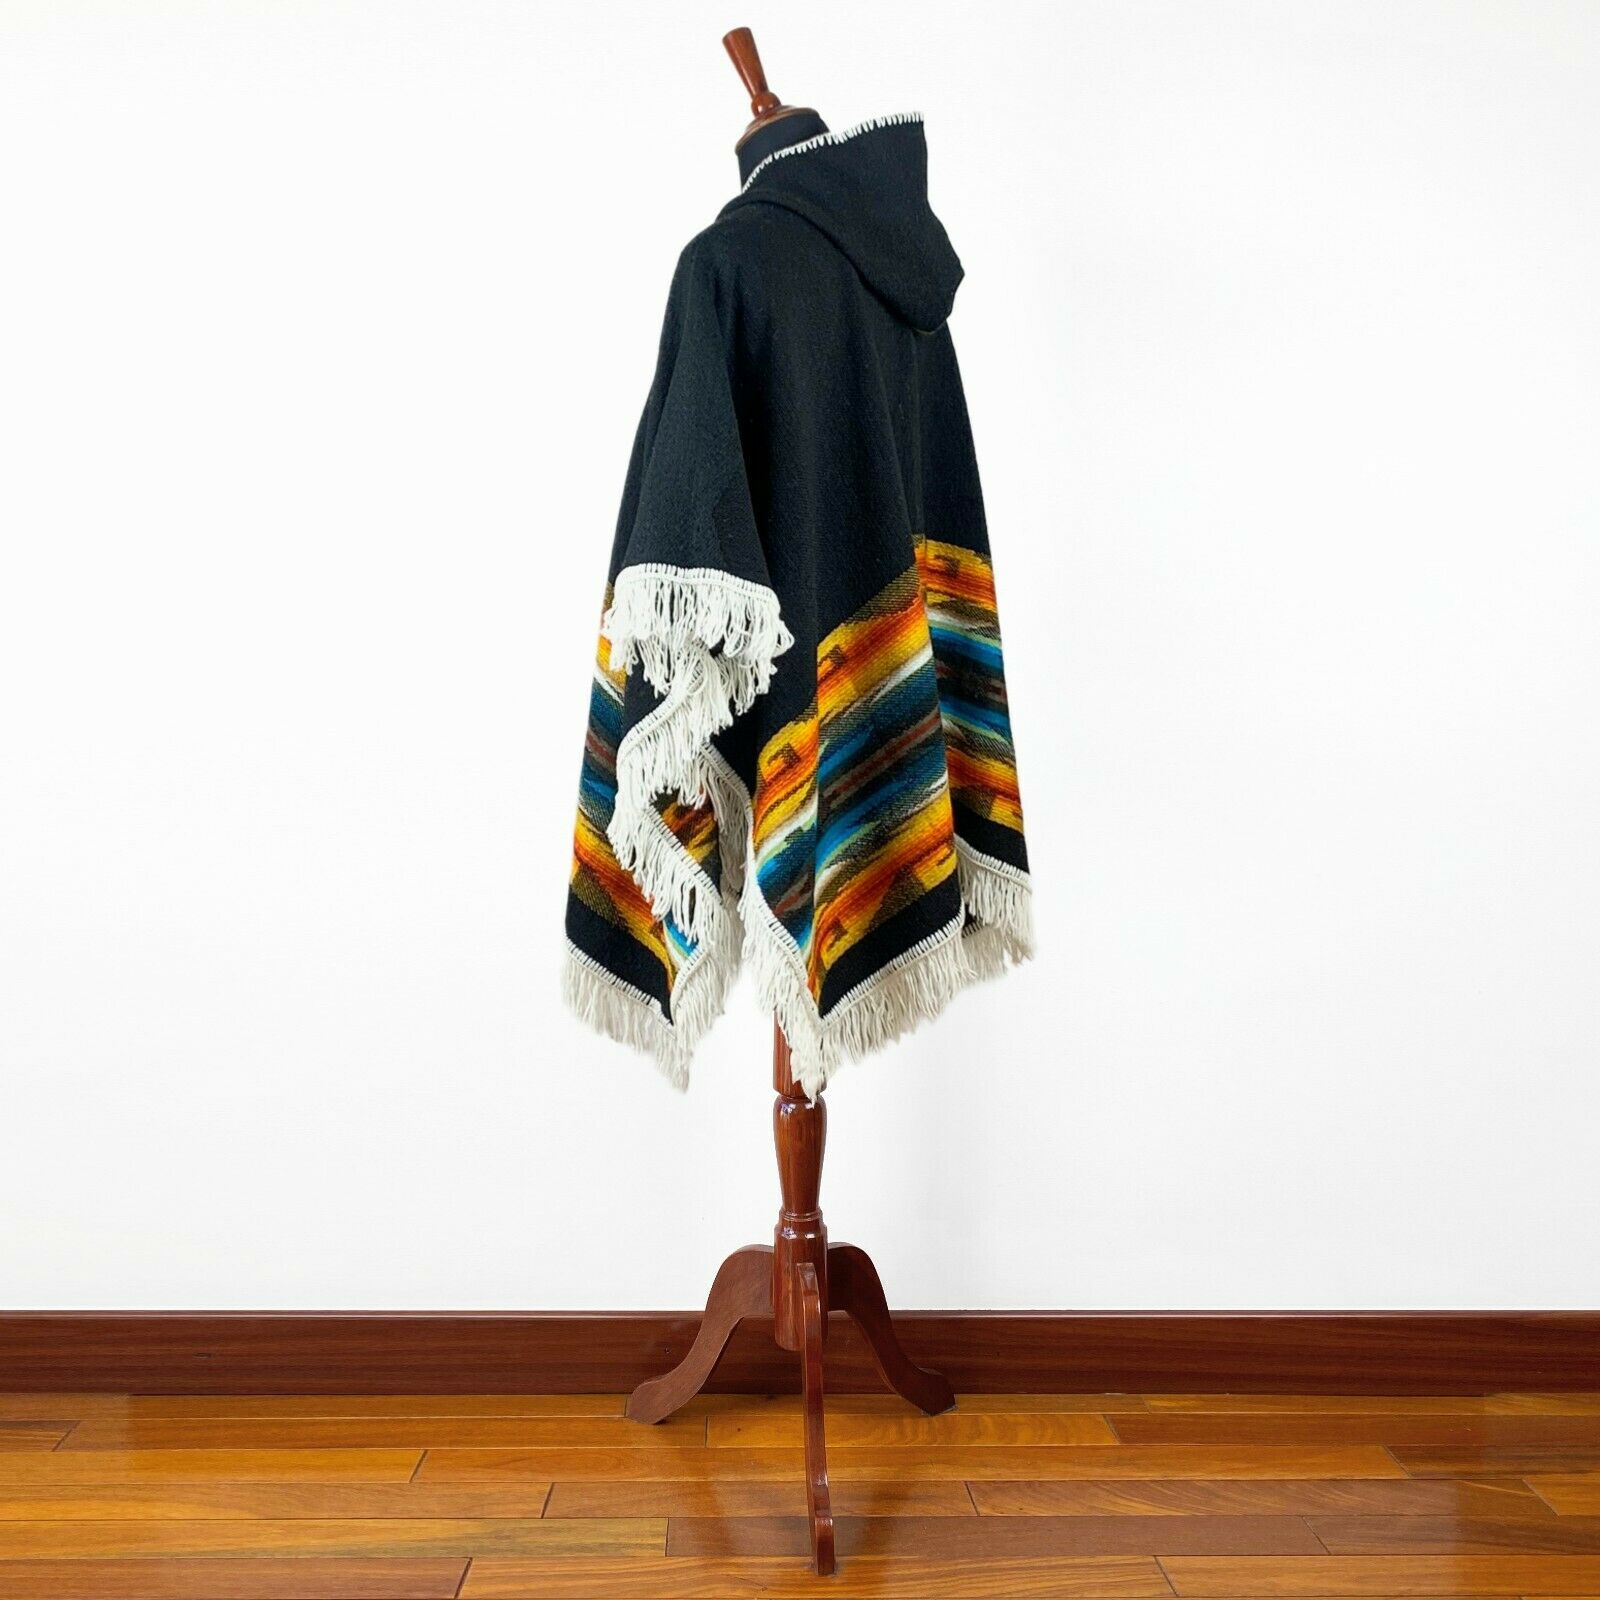 Llama wool Unisex Hooded Open Cape Poncho - Authentic South American Aztec pattern - BLACK